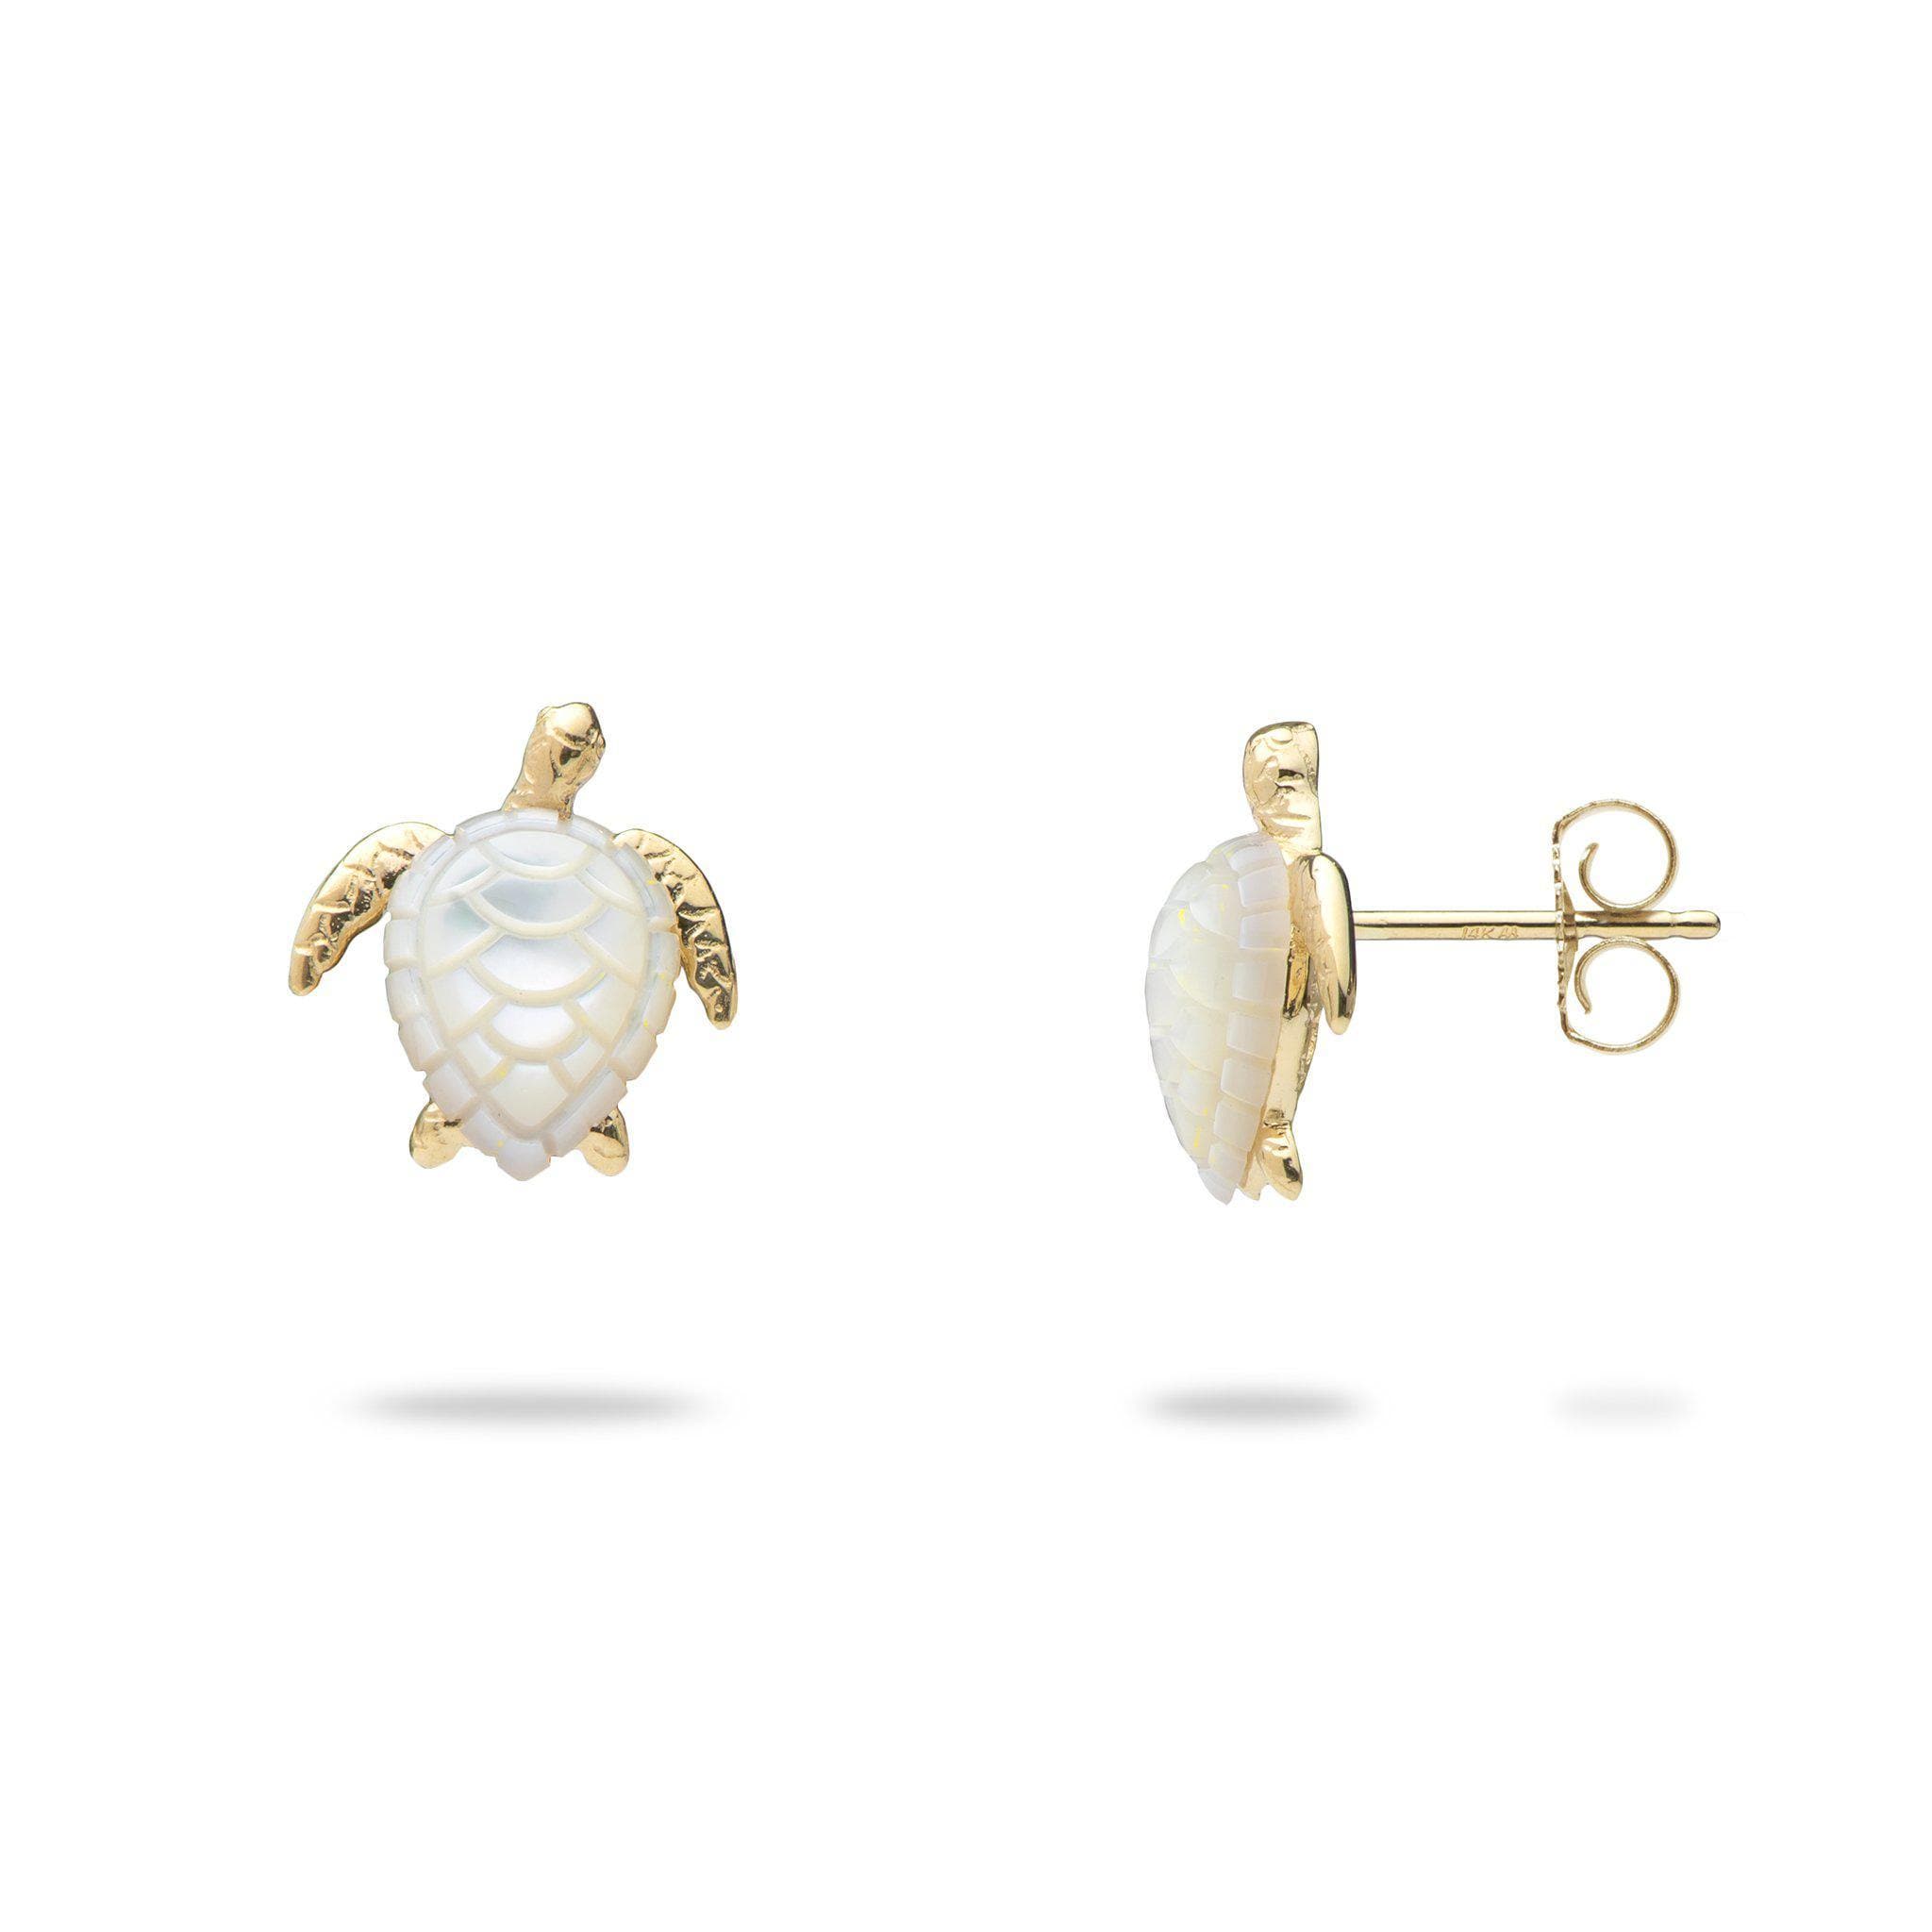 Honu (Sea Turtle) Mother of Pearl Earrings in Gold – Maui Divers Jewelry